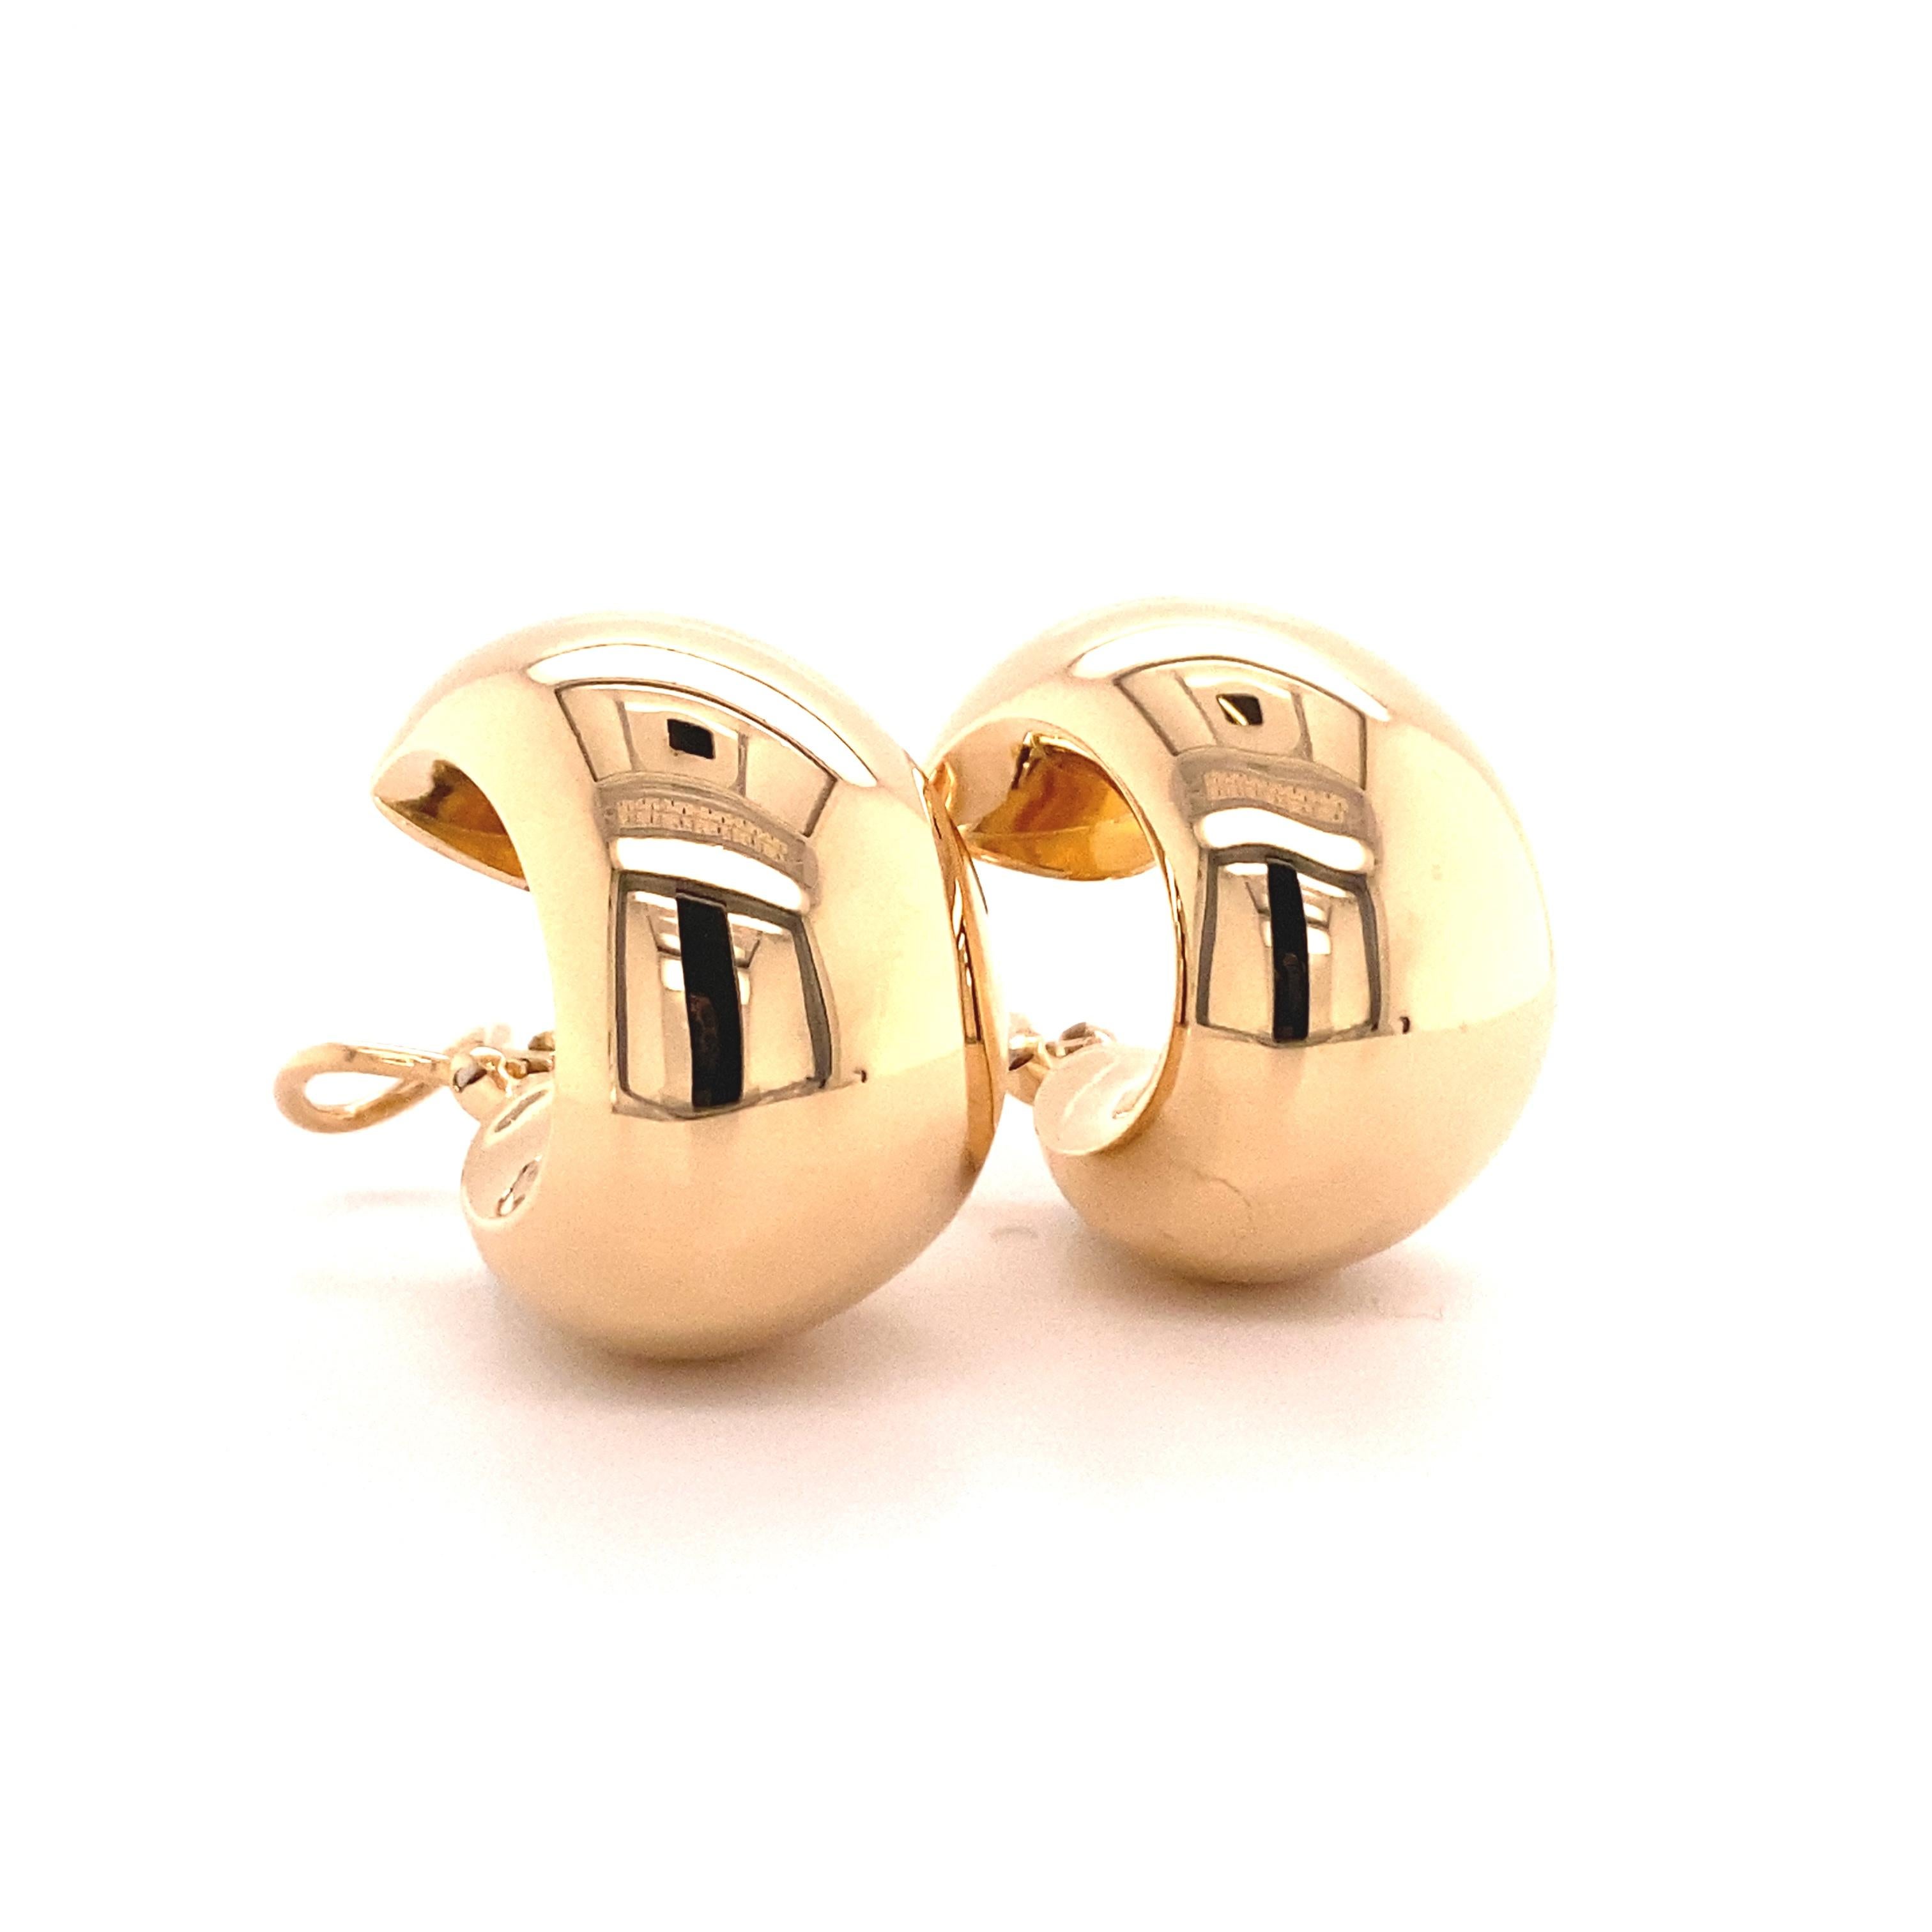 This sensual pair of earclips in 18 karat rose gold is masterfully handcrafted by renowned Swiss jeweller Majo Fruithof. Due to their generously shaped omega fastenings, the clips fit perfectly and can be worn comfortably and securely.

Maker's